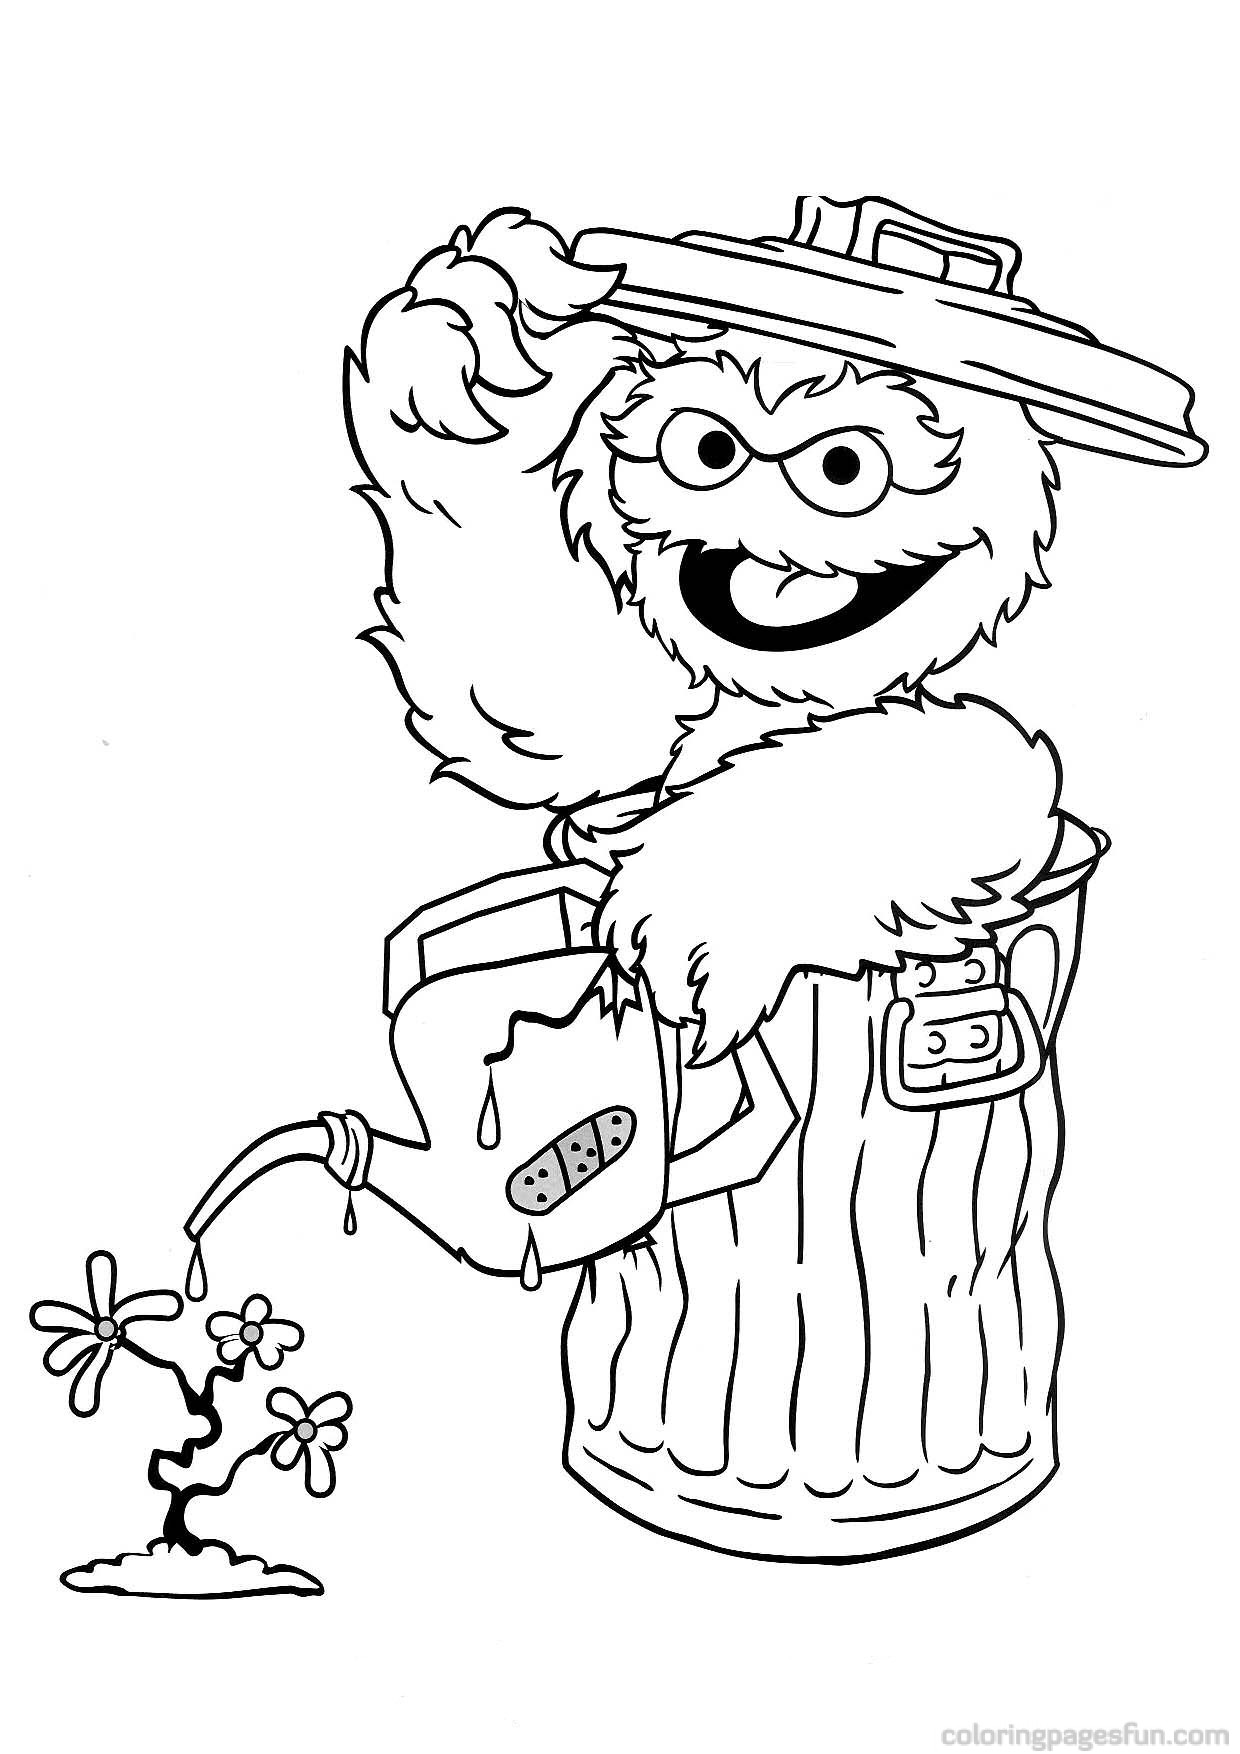 Sesame street coloring pages to download and print for free